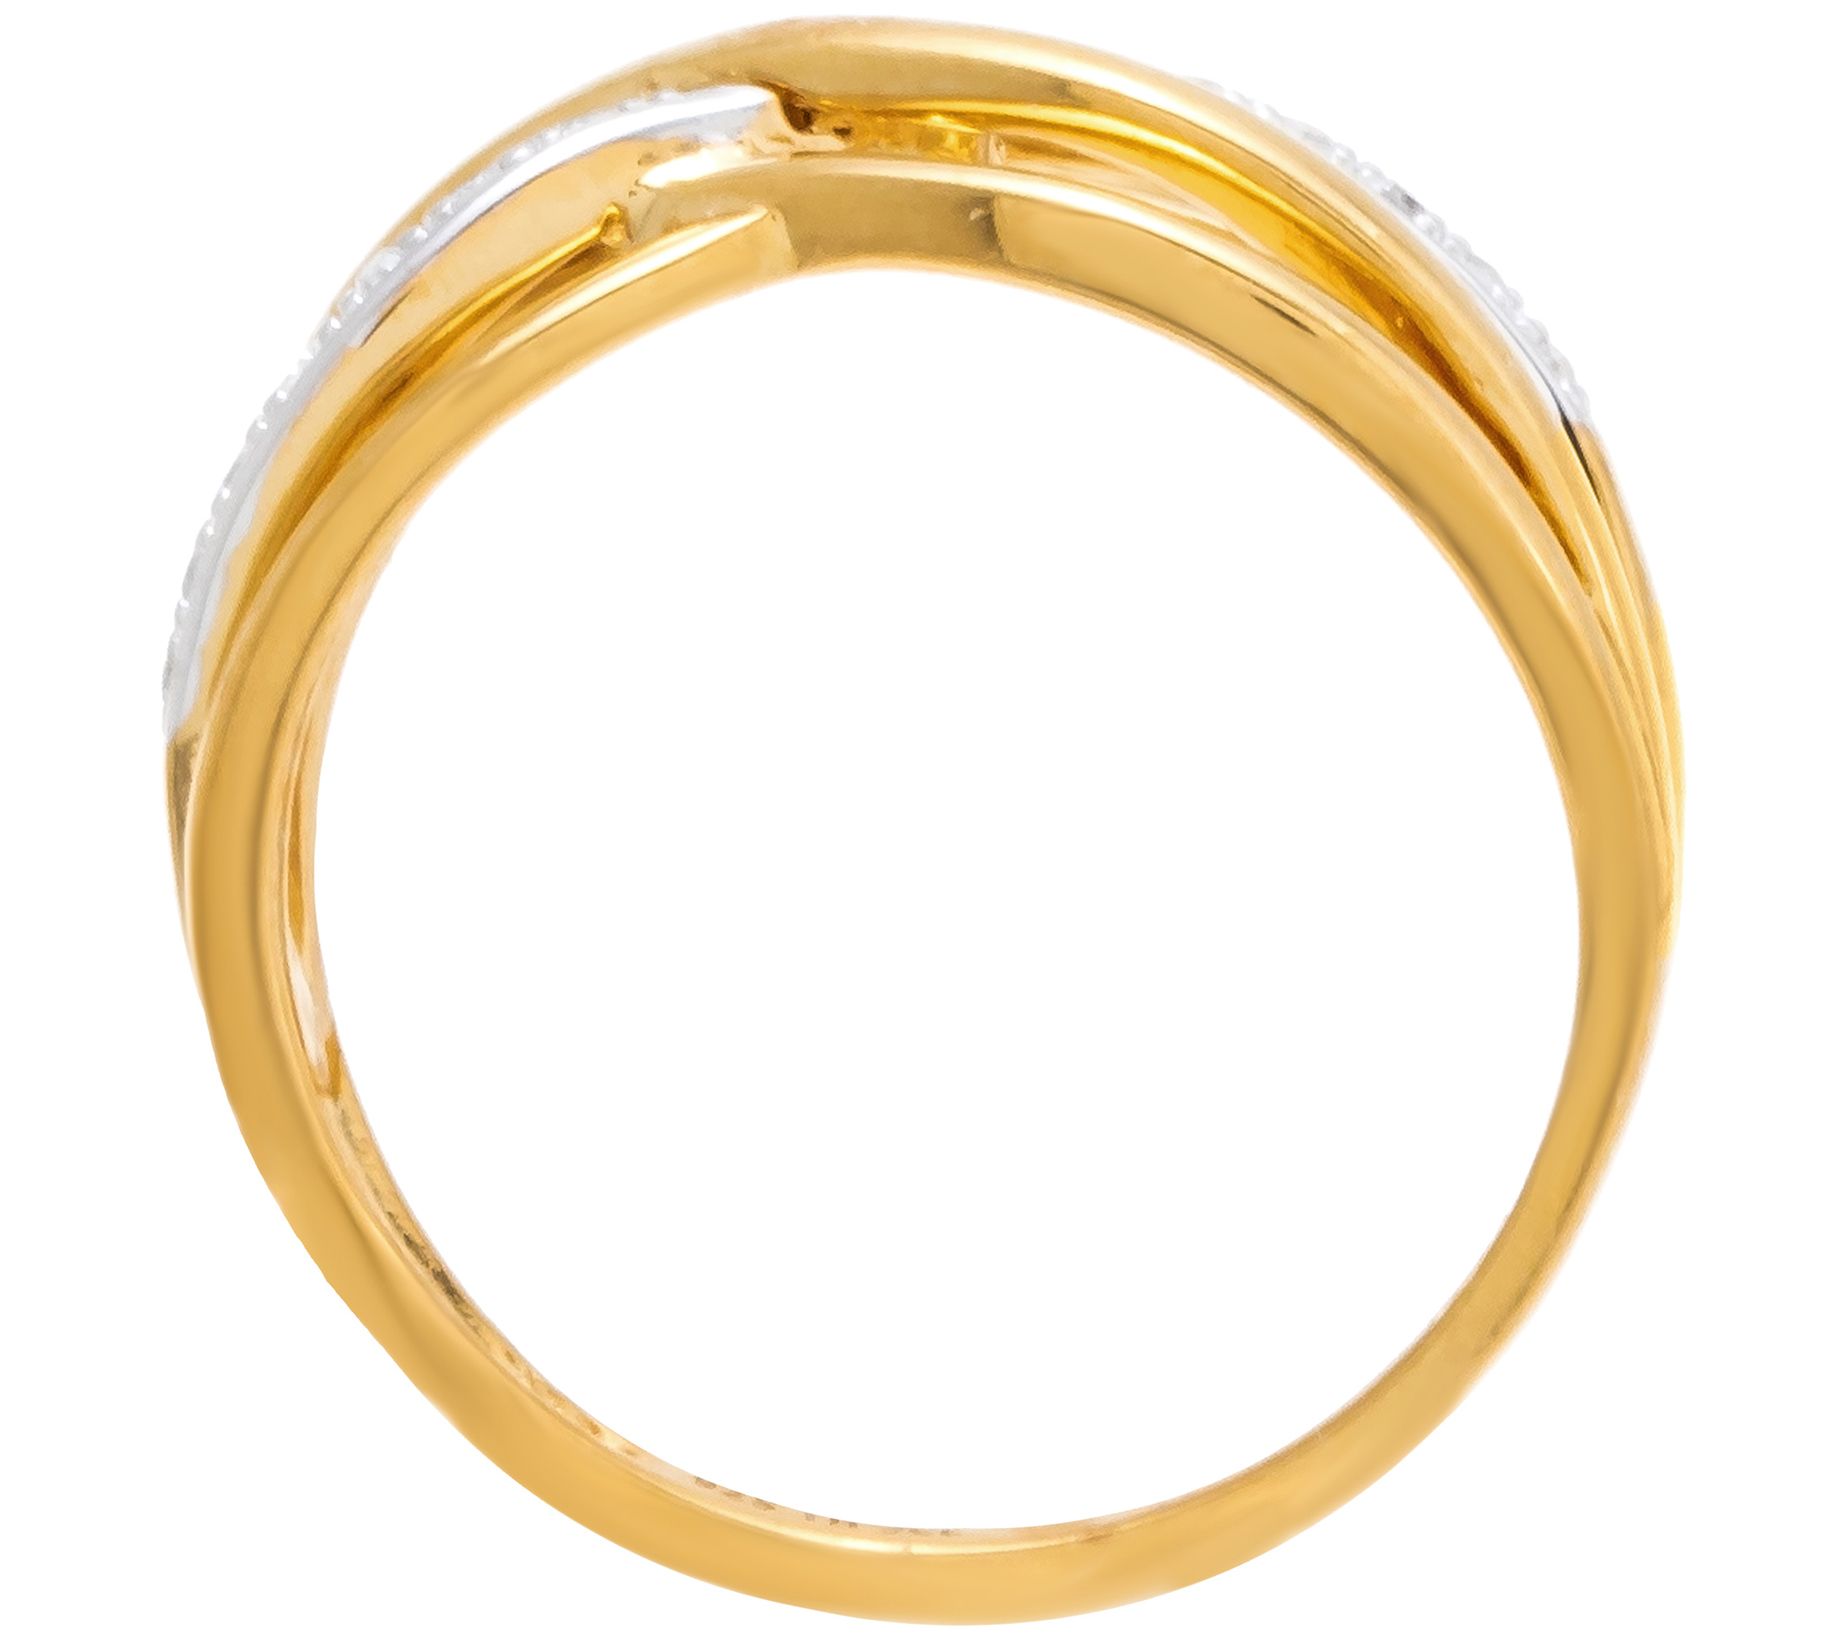 Accents by Affinity Diamond Criss Cross Ring, 14K Gold Plated - QVC.com